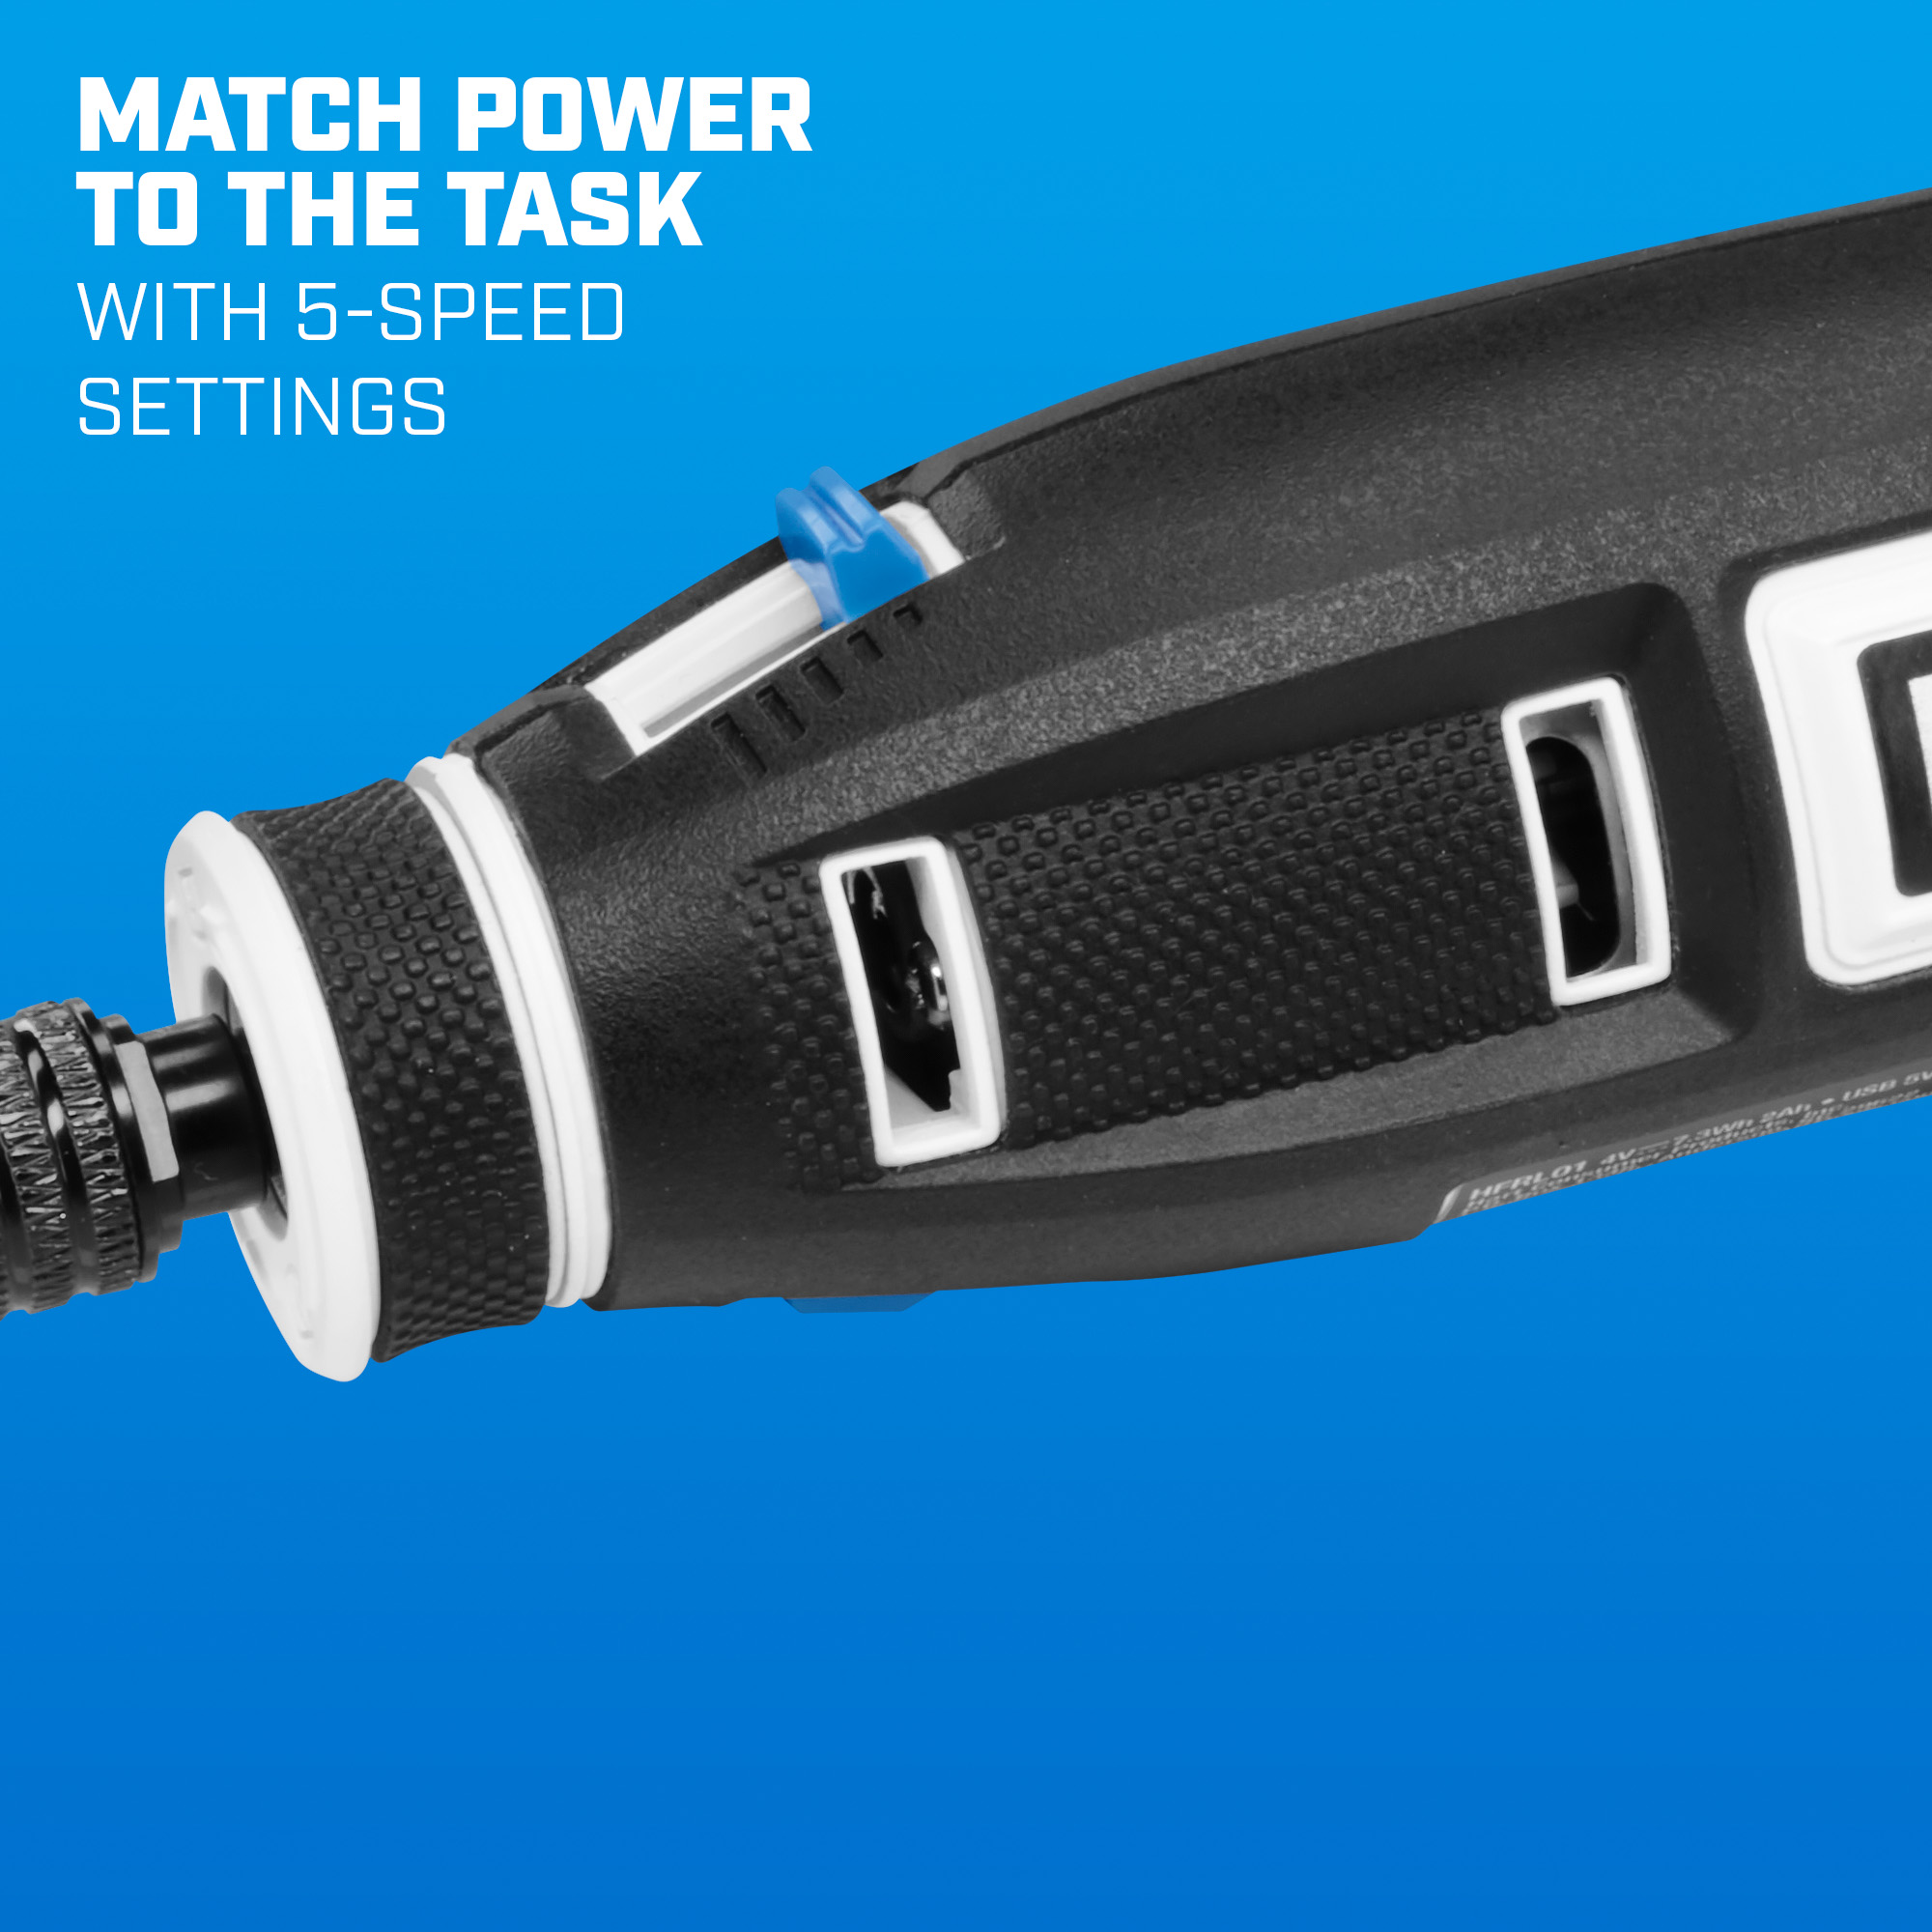 match power to the task with 5-speed settings